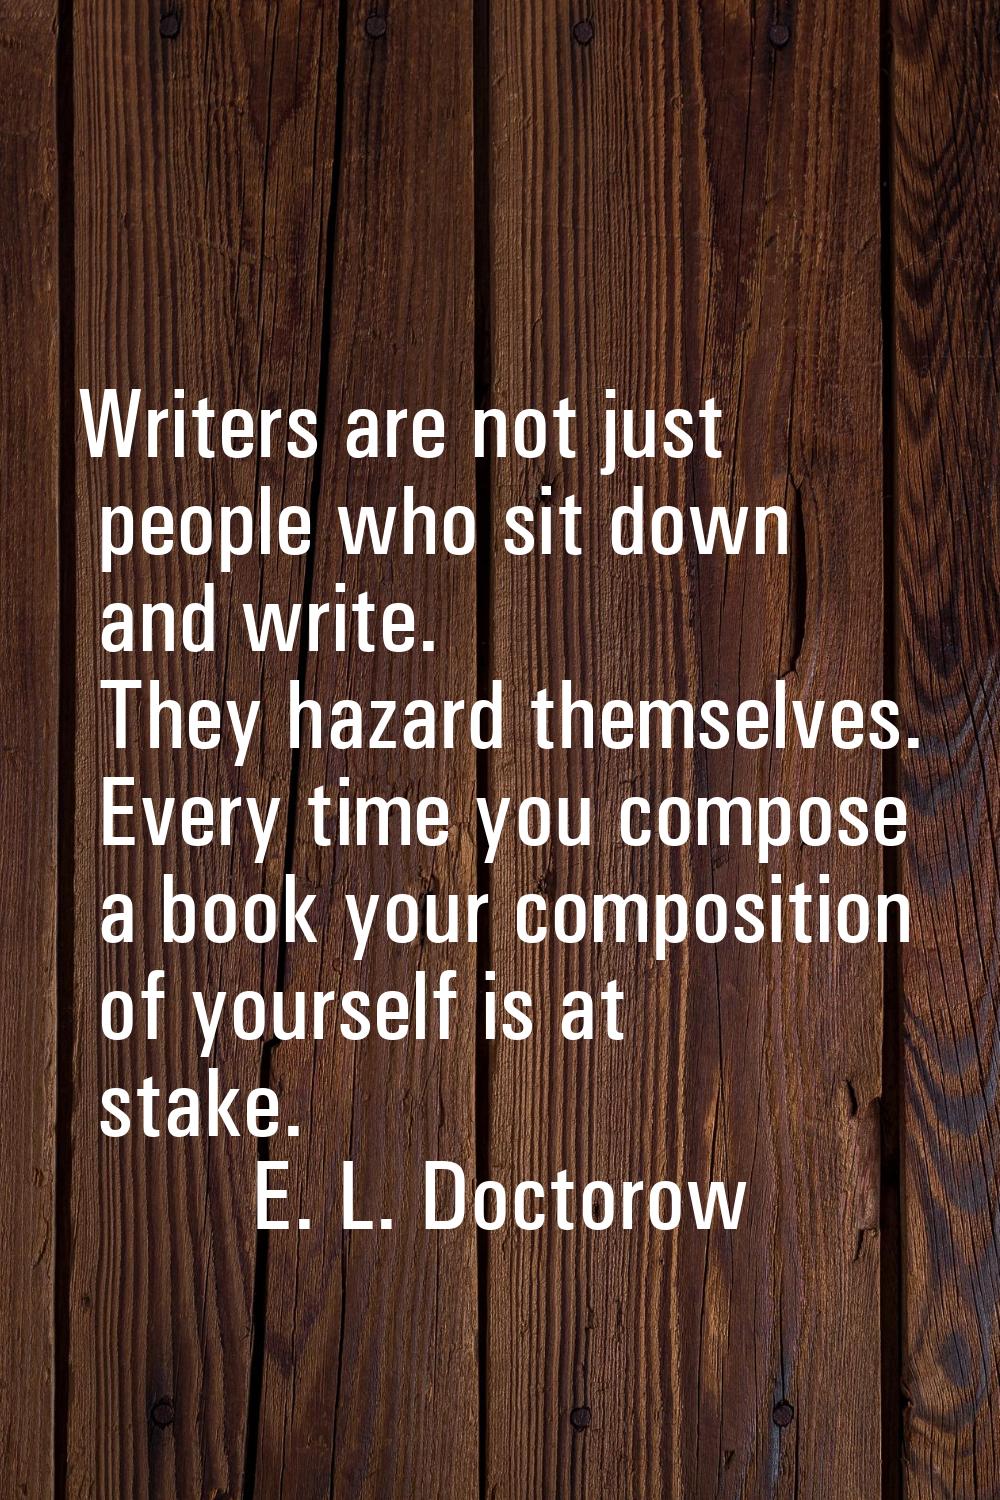 Writers are not just people who sit down and write. They hazard themselves. Every time you compose 